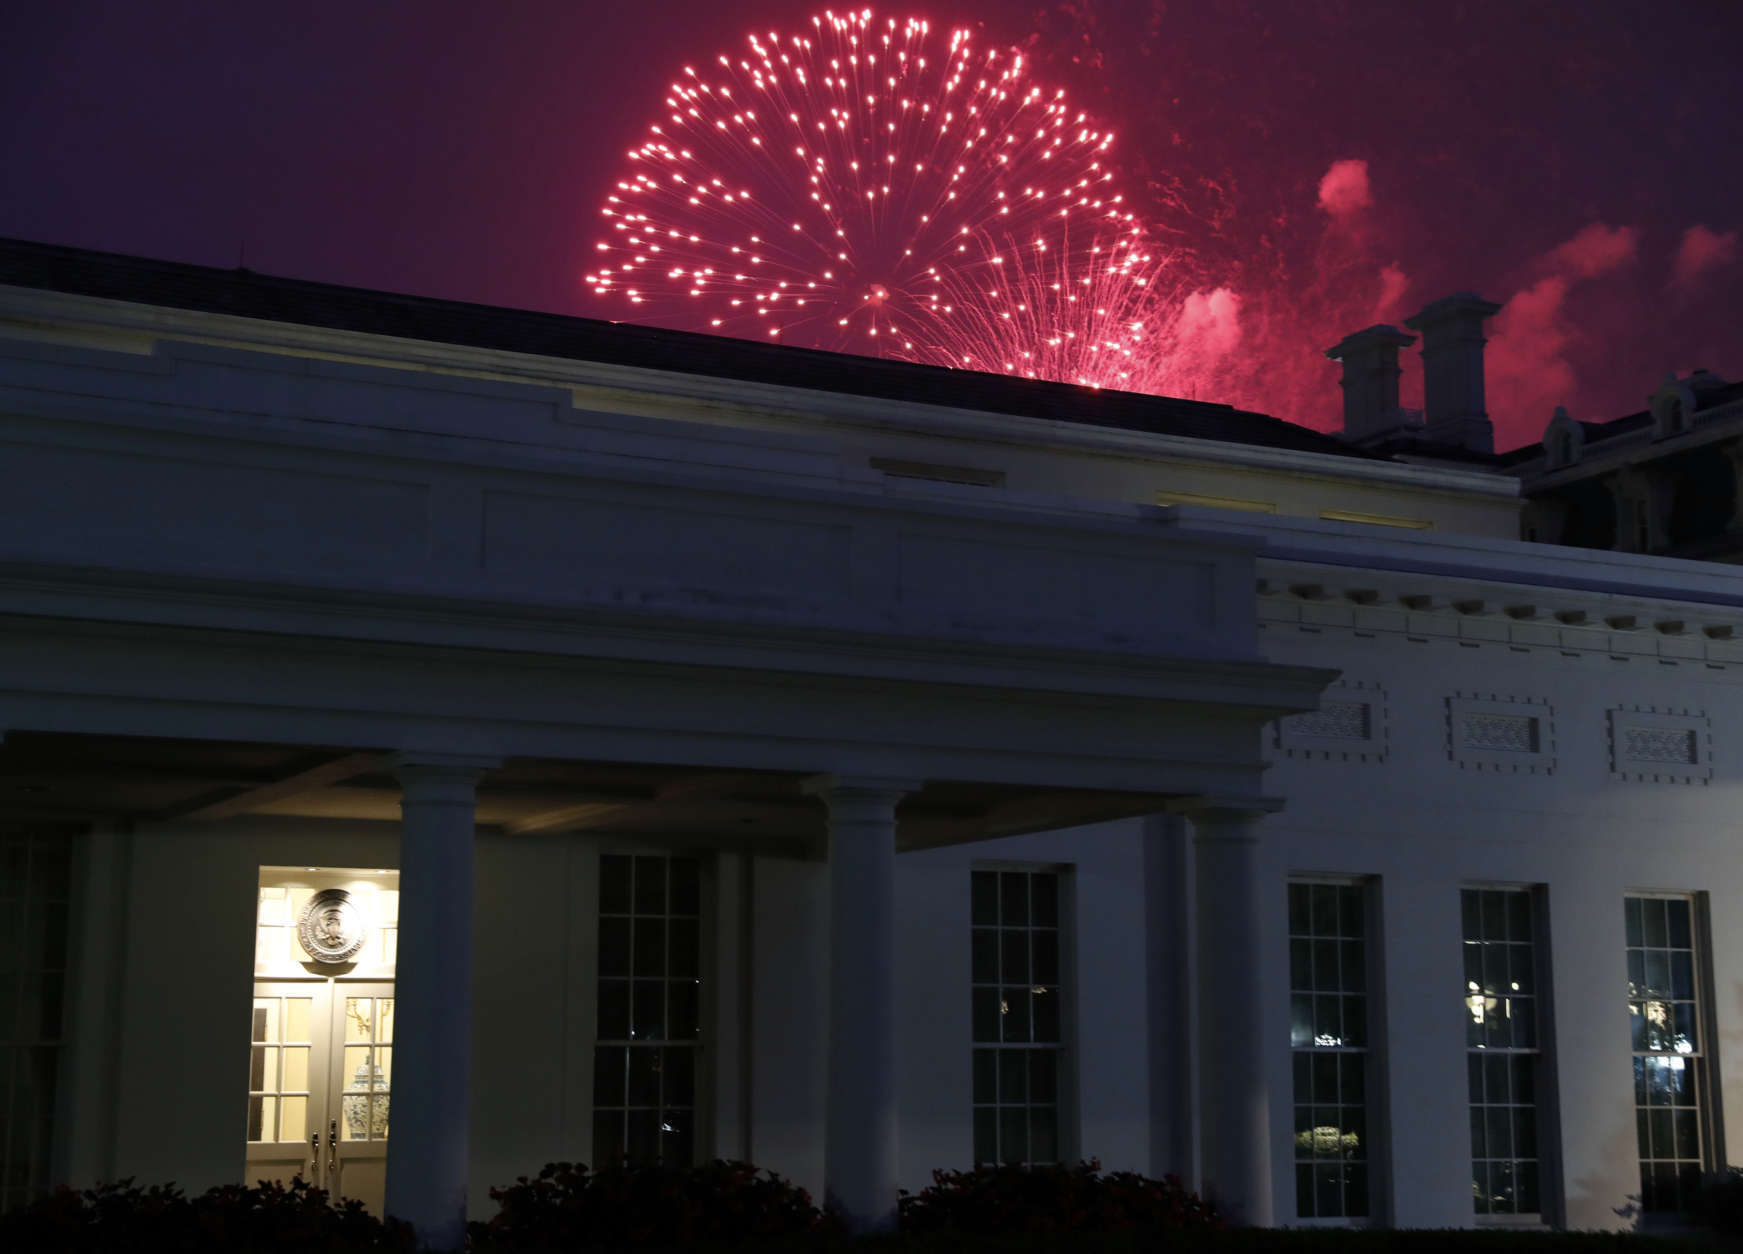 Fireworks explode over the West Wing of the White House for the Fourth of July holiday, Tuesday, July 4, 2017, in Washington. (AP Photo/Alex Brandon)